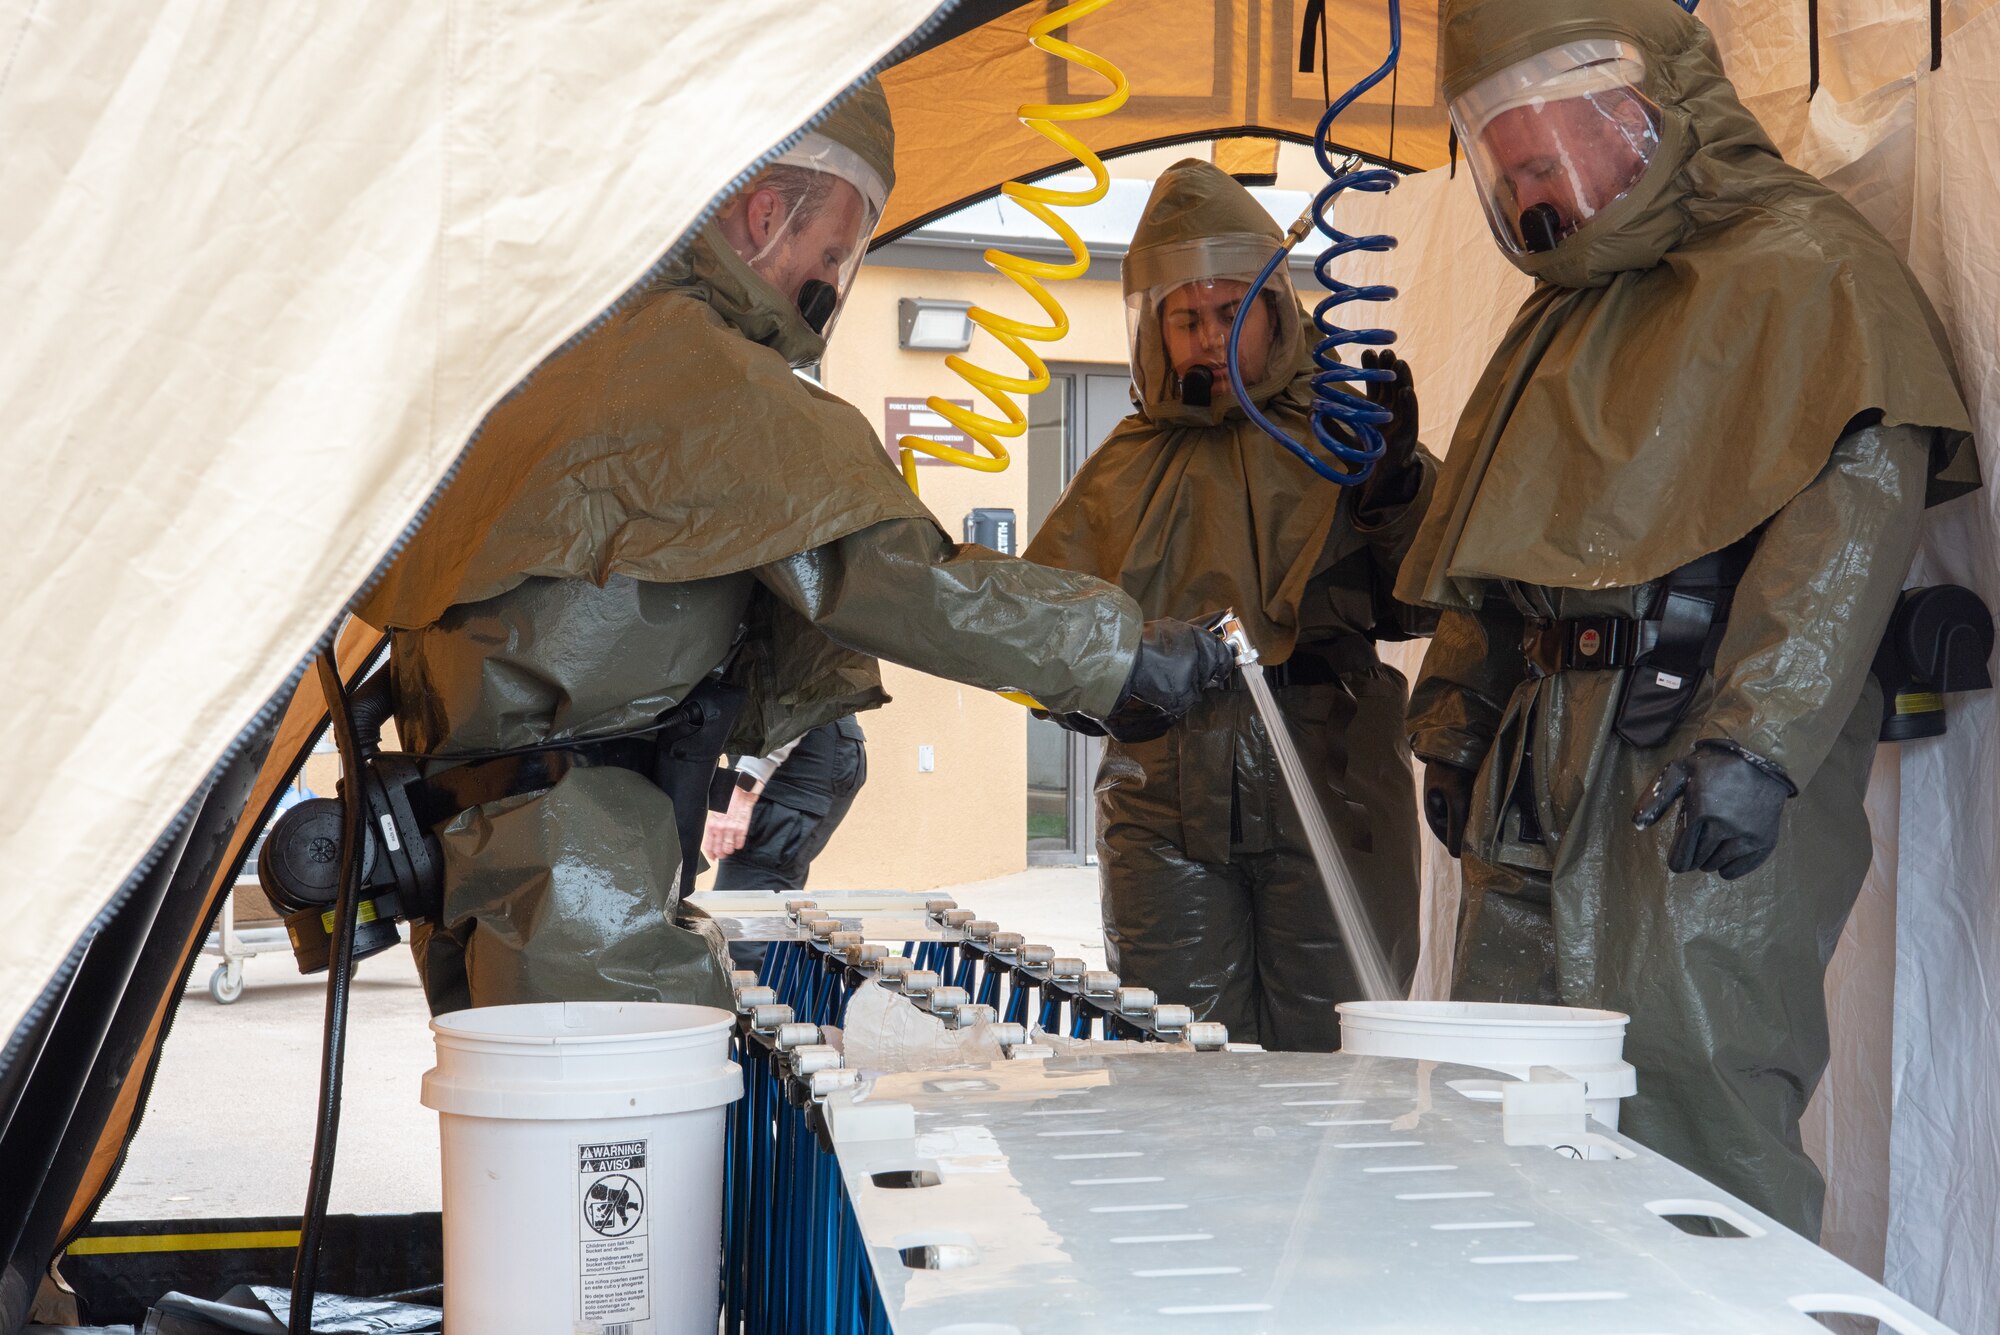 Airmen from the 7th Medical Group sanitize the simulated casualty area during a decontamination exercise at Dyess Air Force Base, Texas, June 1, 2023.The exercise required the completion of a three-day training course that tested Airmen’s medical disaster response. (U.S. Air Force photo by Airman 1st Class Alondra Cristobal Hernandez)